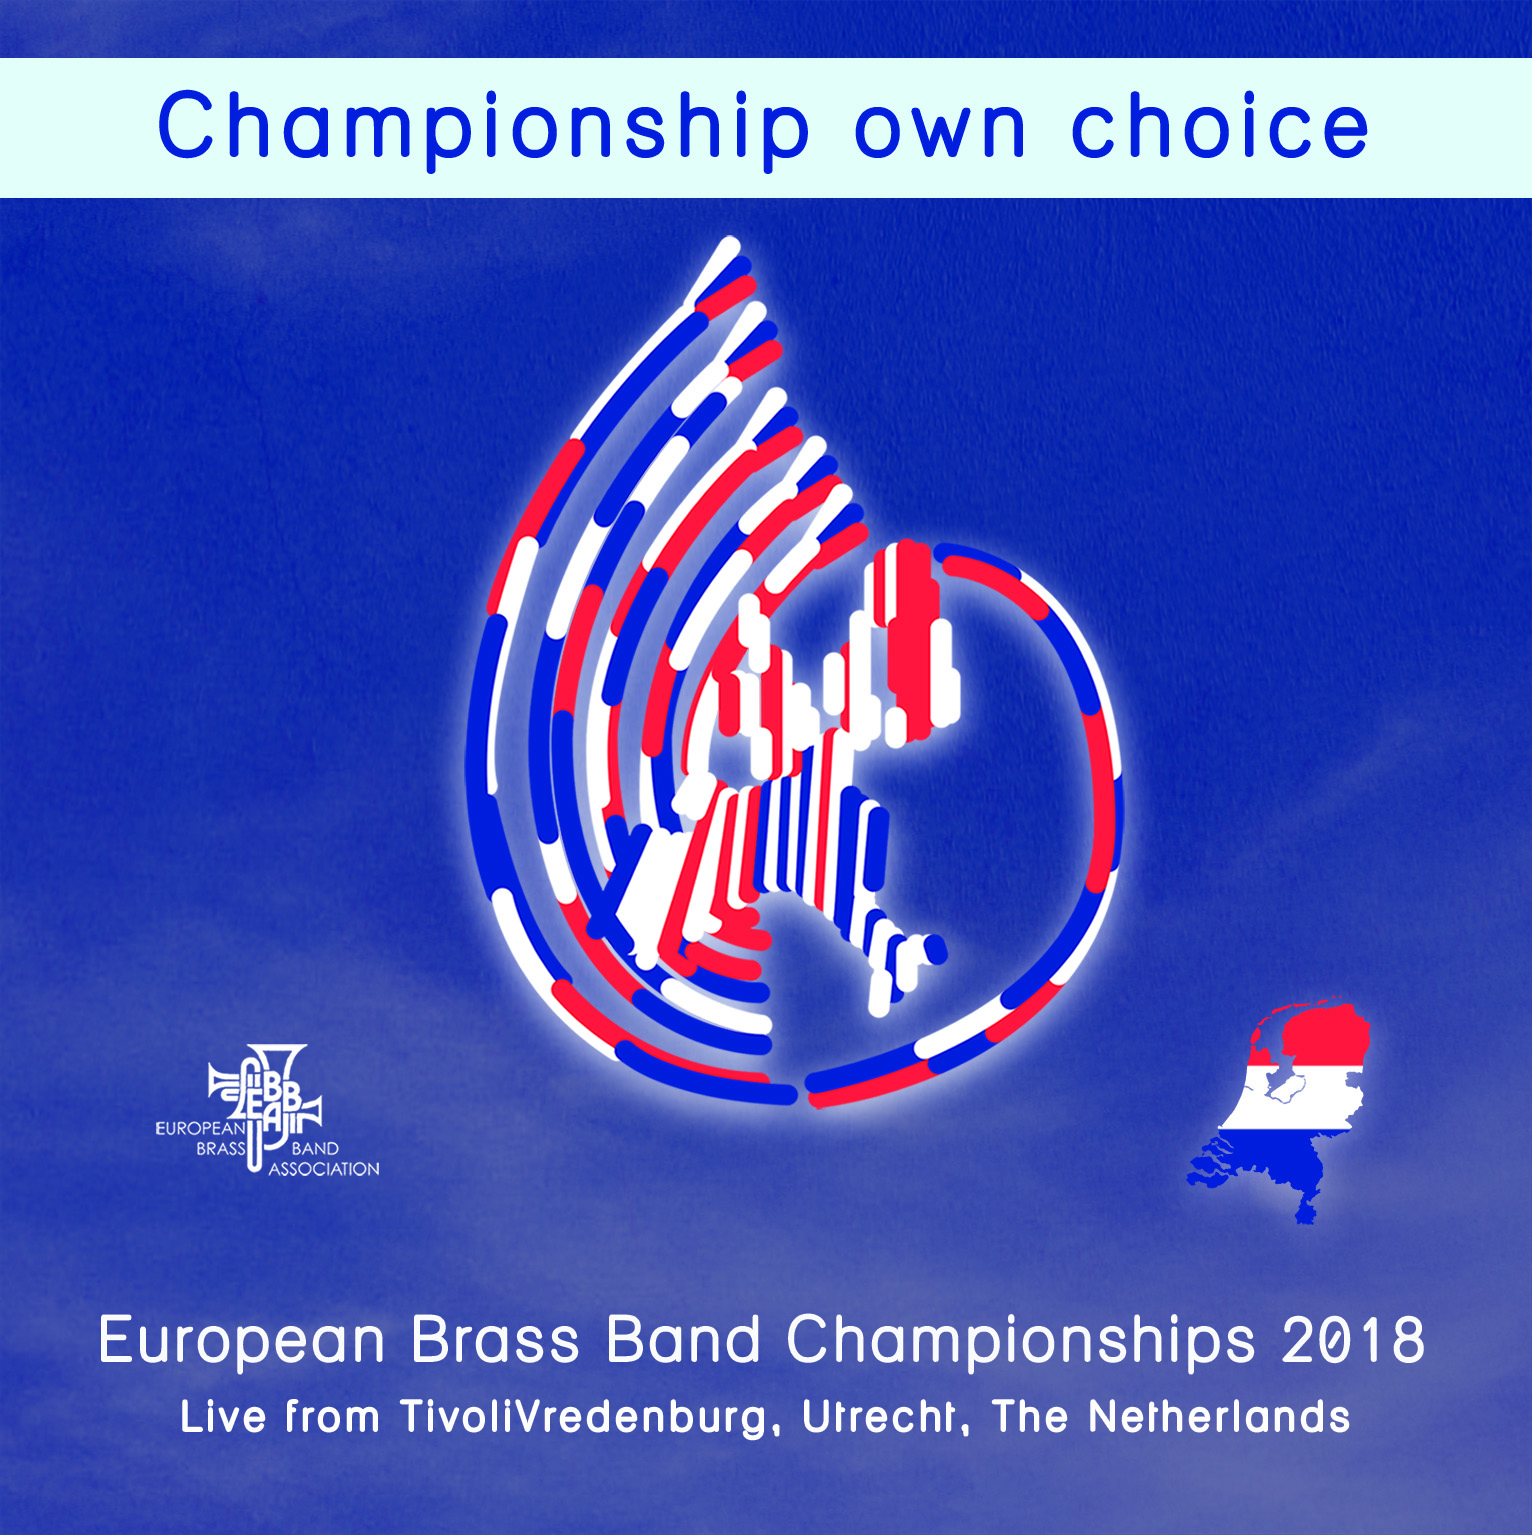 European Brass Band Championships 2018 - Championship Section Own Choice - Download